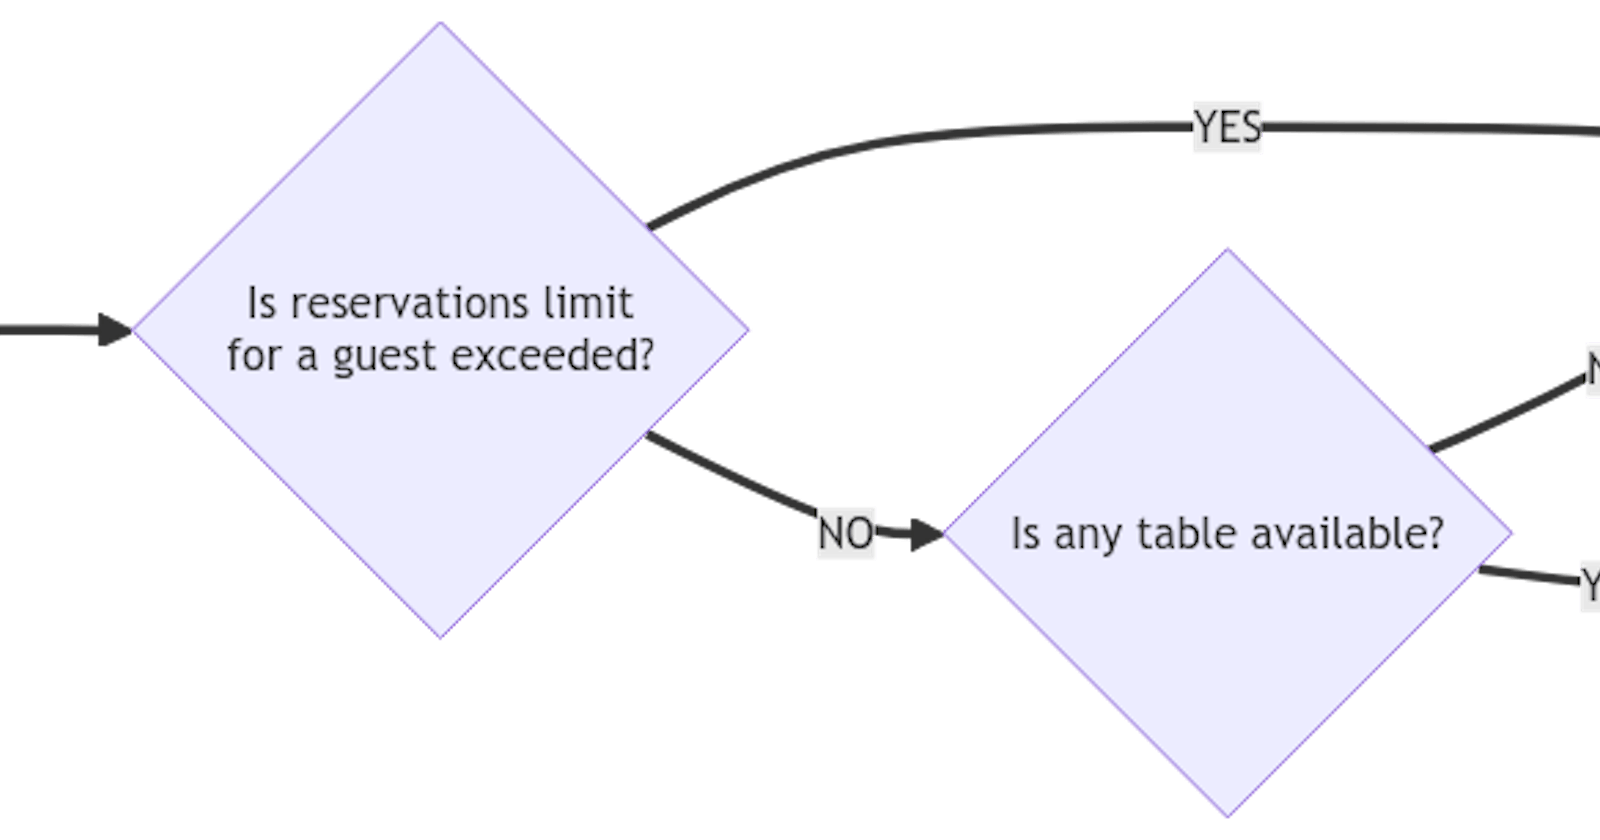 How to improve your documentation with various types of diagrams